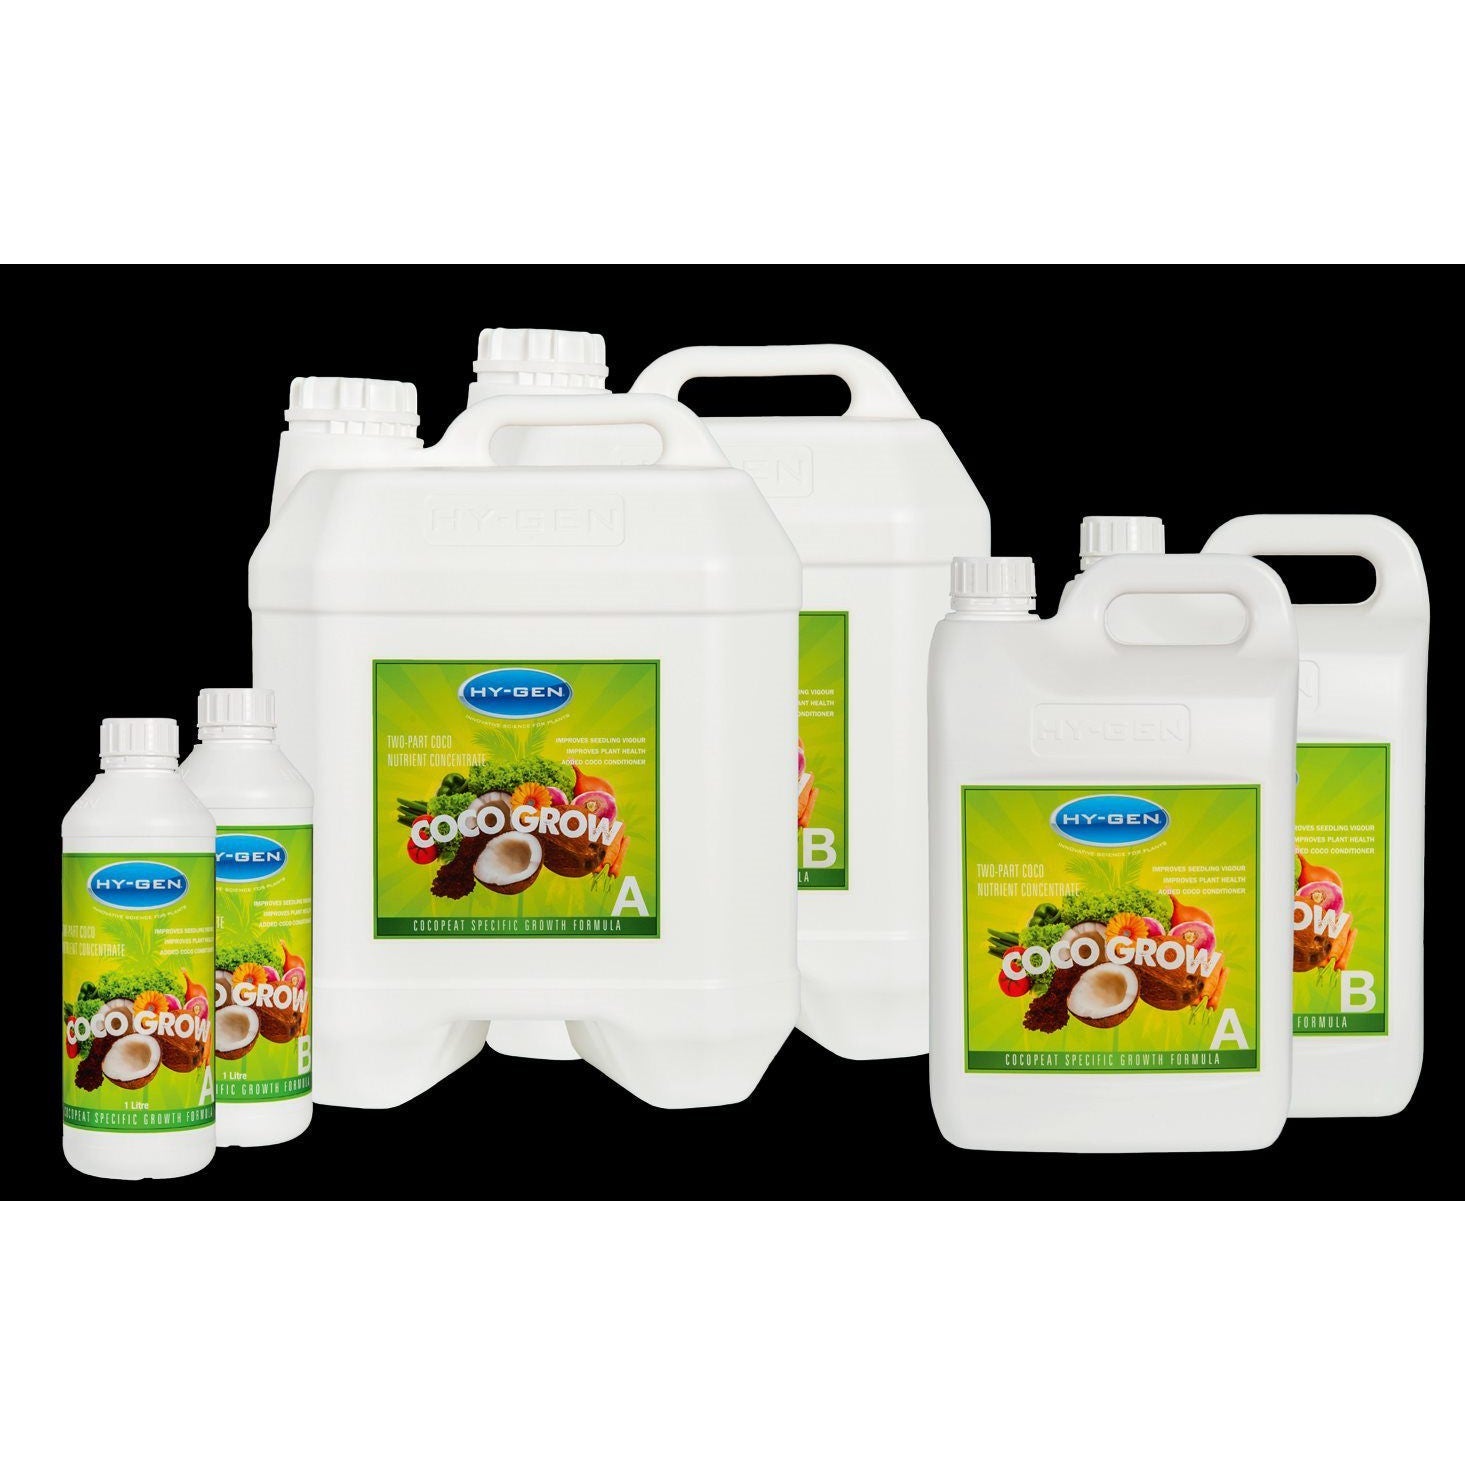 HY-GEN COCOGROW - Hydroponic Solutions